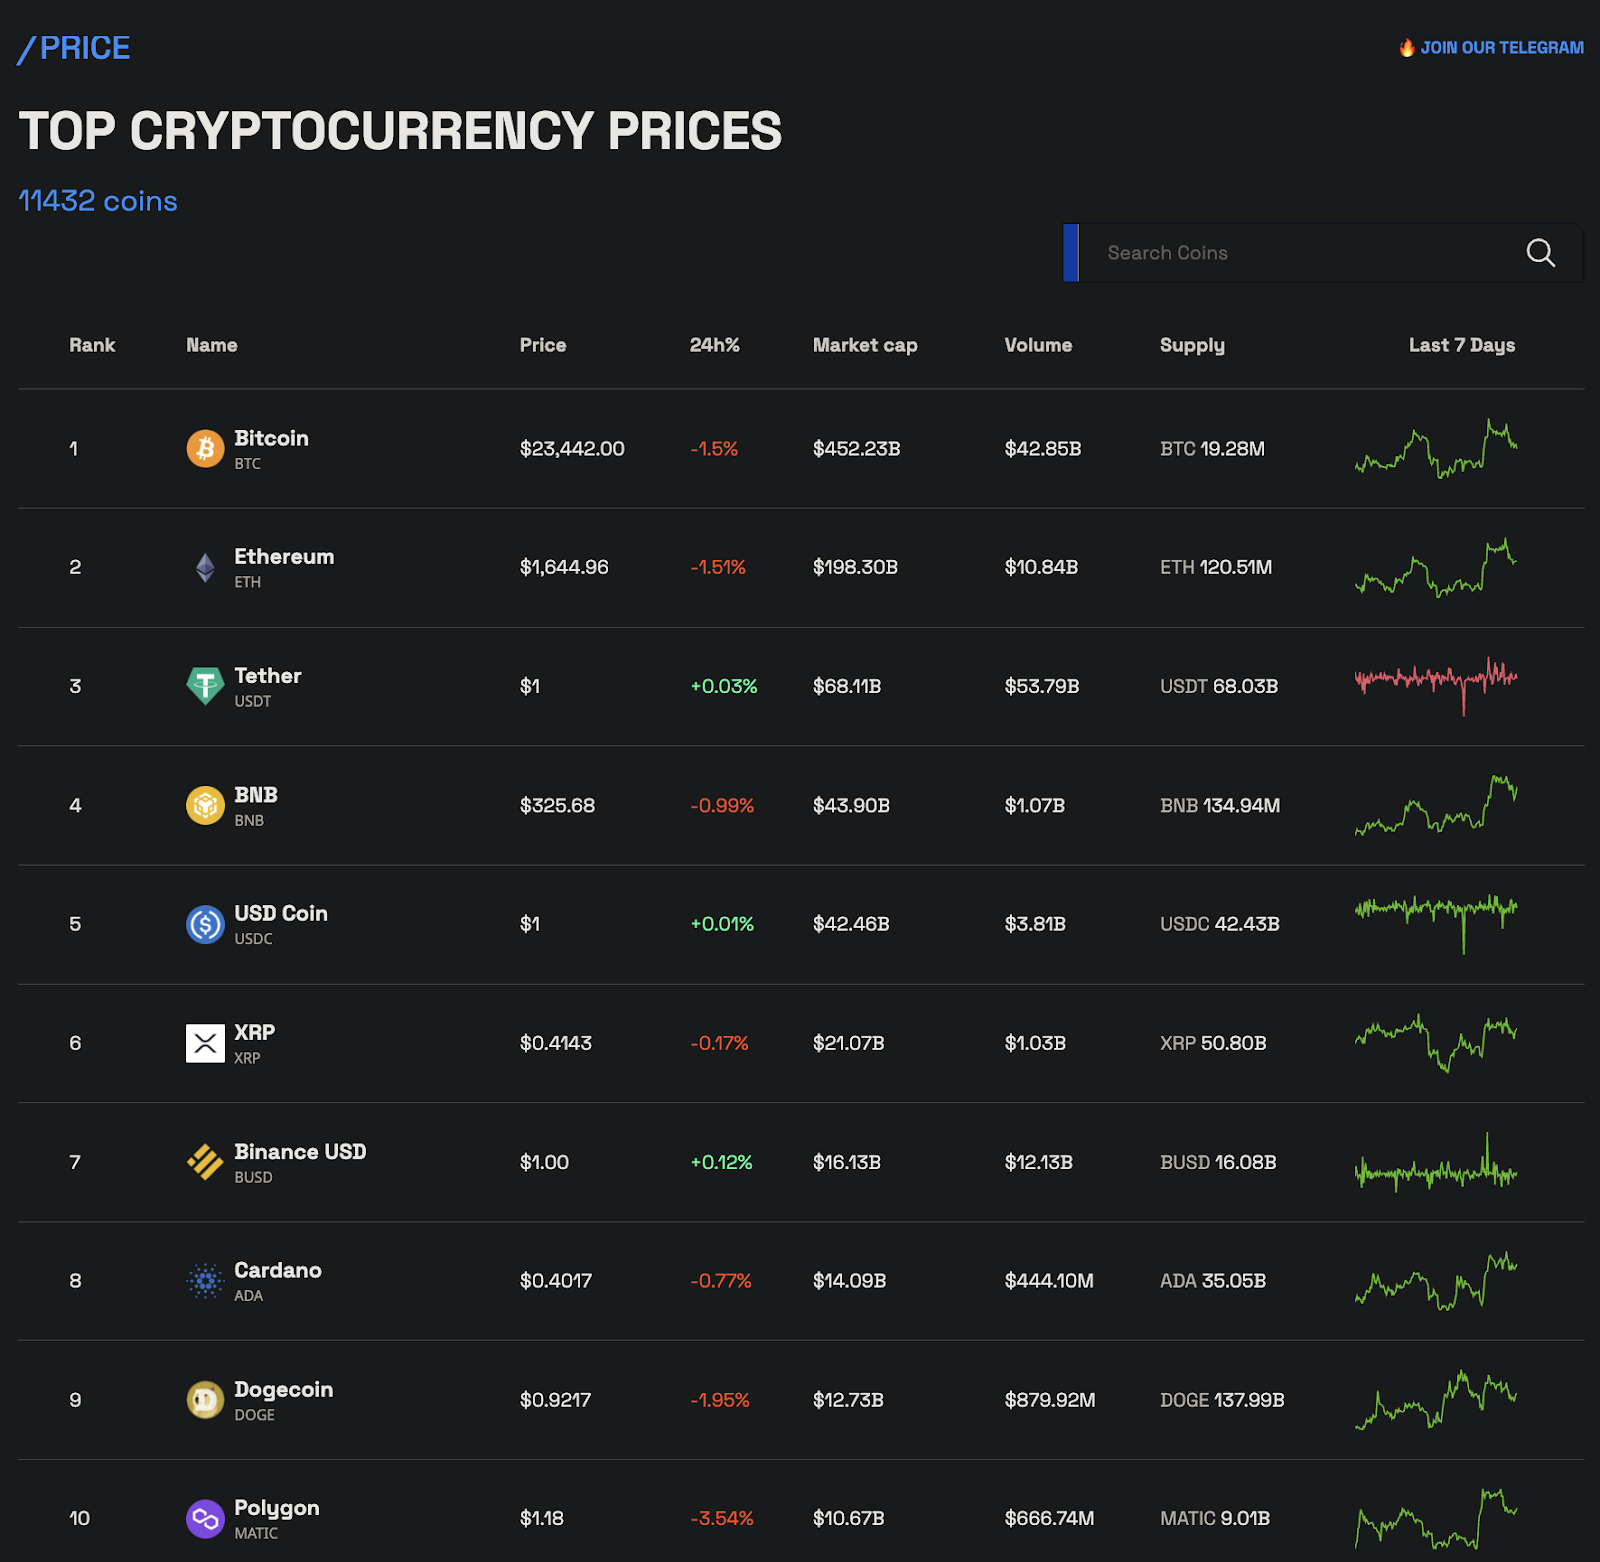 The top gaining cryptocurrency of the past week